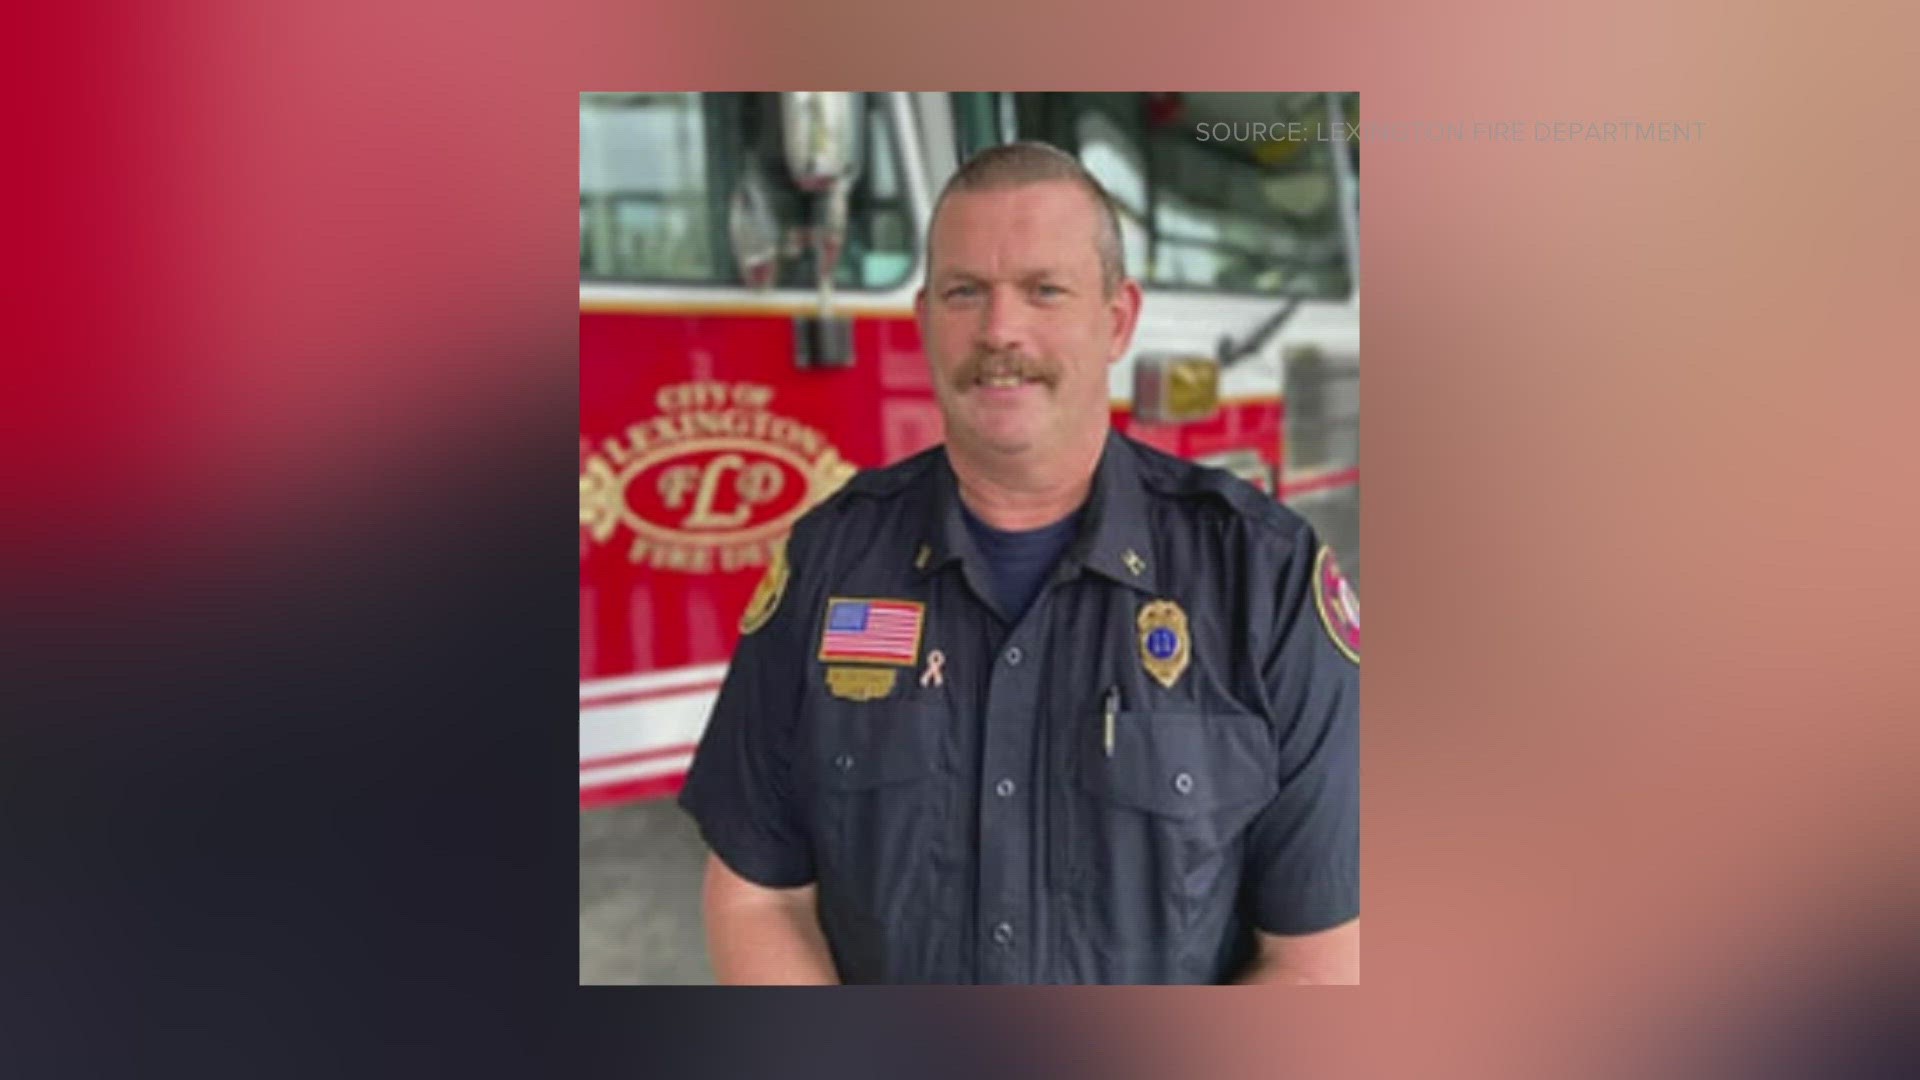 Captain Ronnie Metcalf died from injuries sustained during a fire.